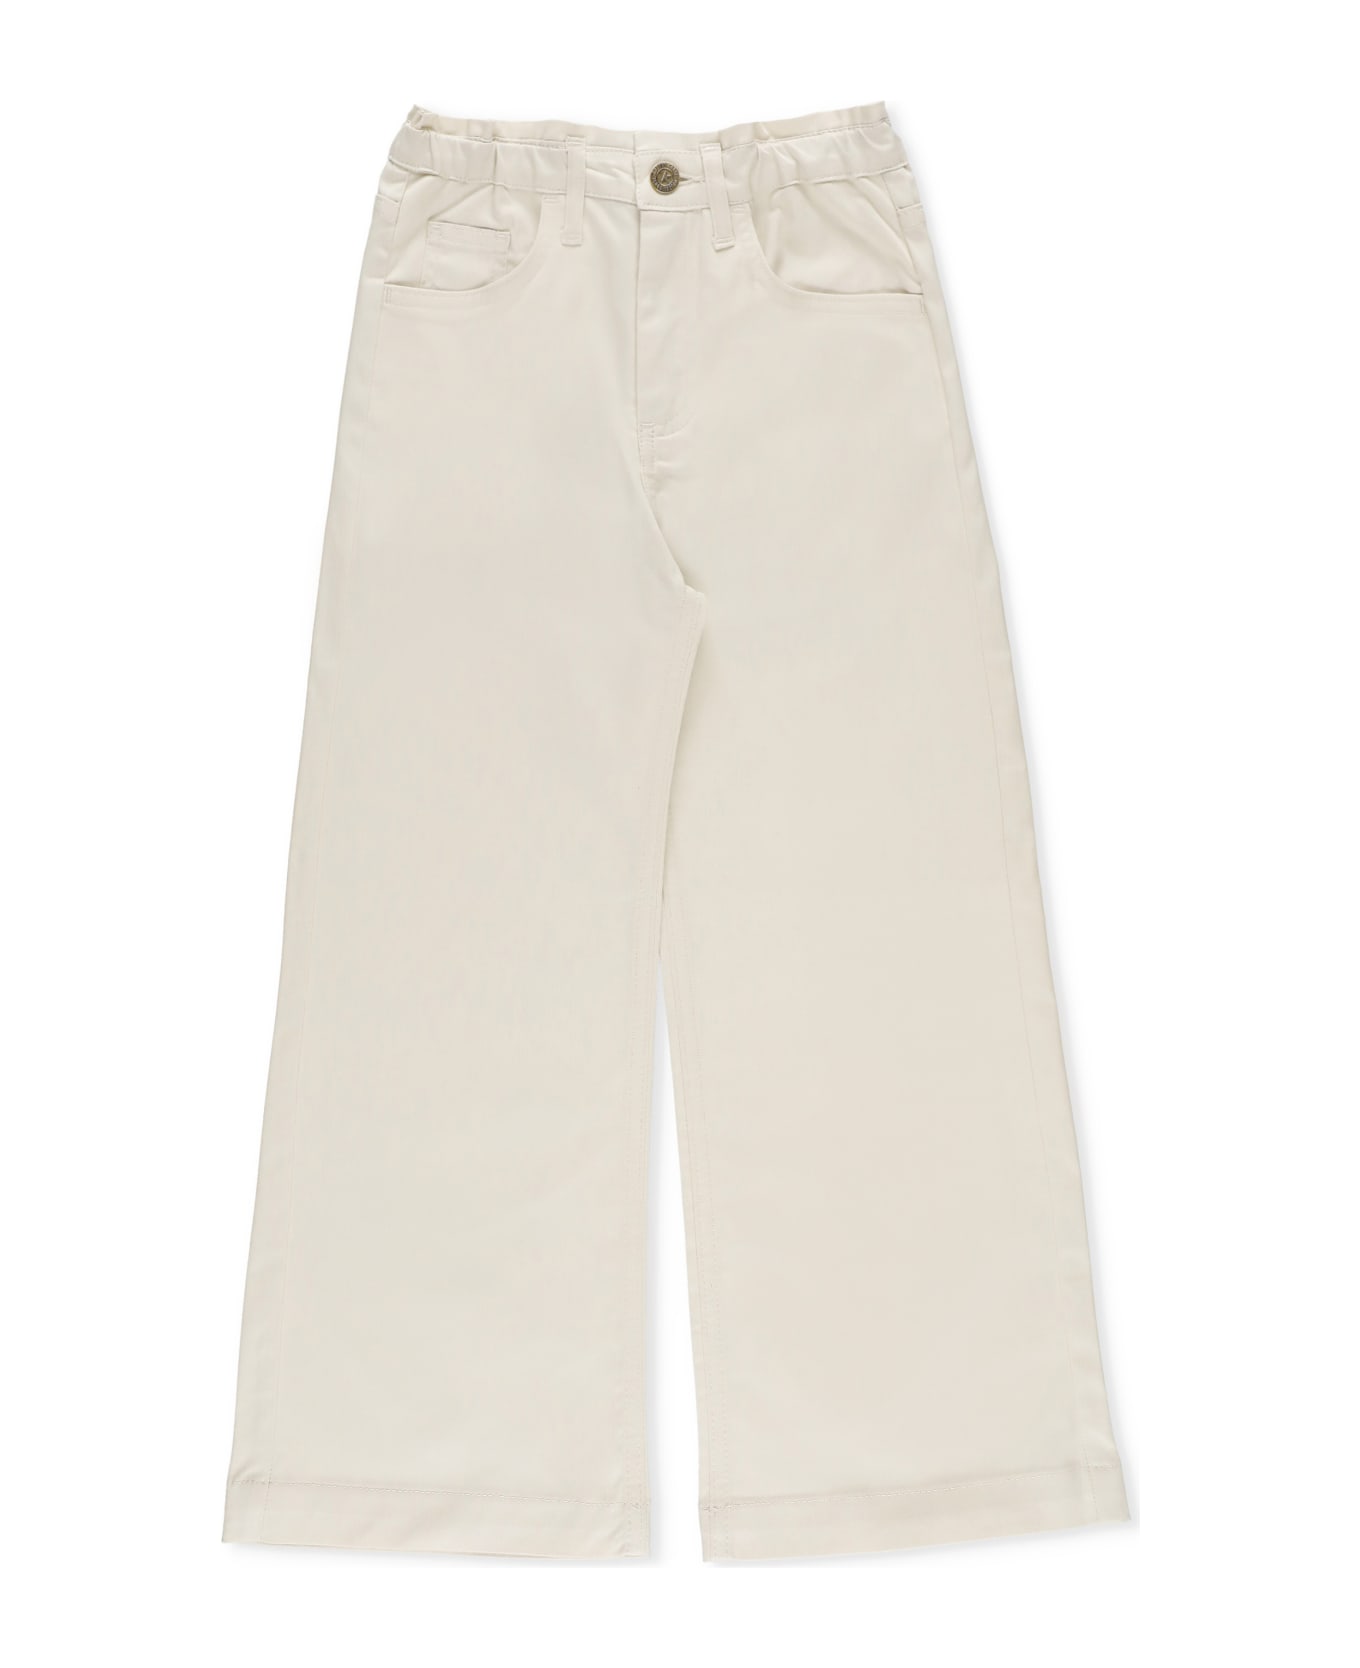 Golden Goose Cotton Jeans - Ivory ボトムス